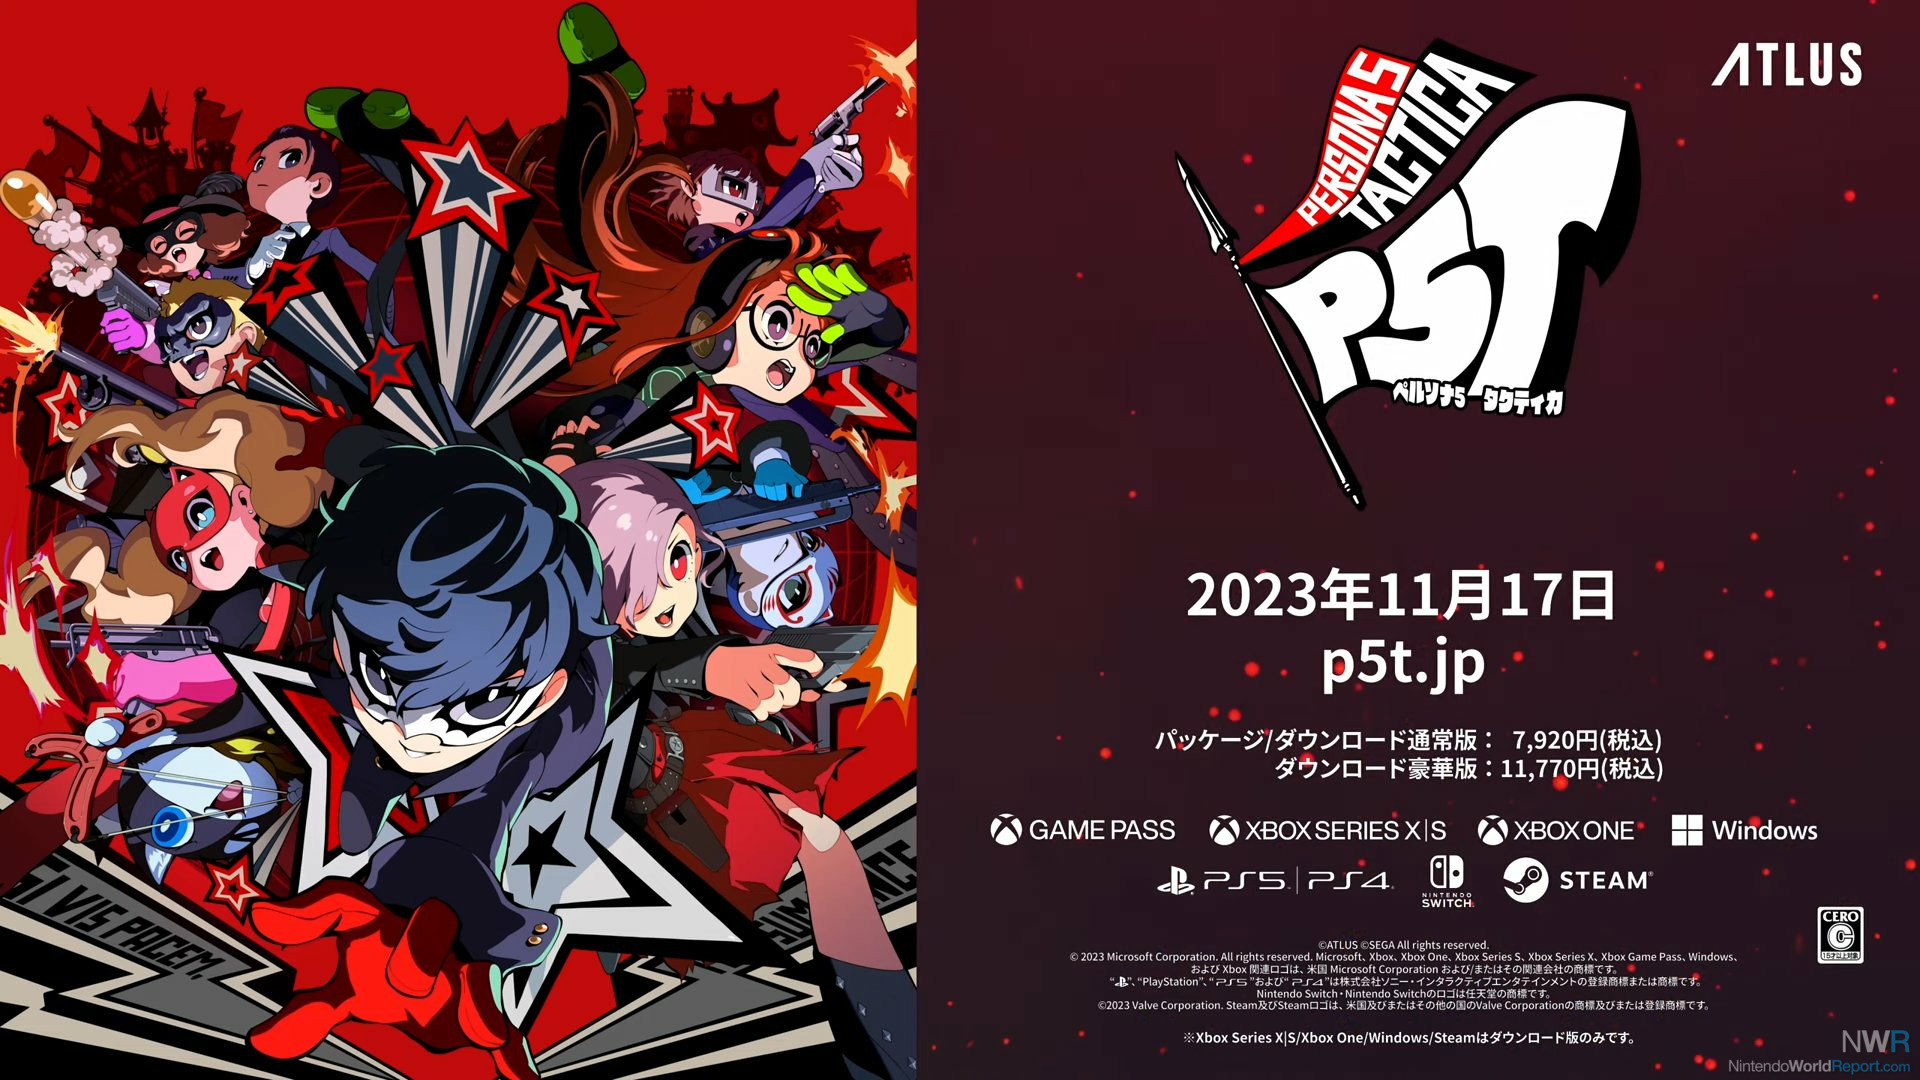 Persona 5 Tactica for Nintendo Switch - Nintendo Official Site